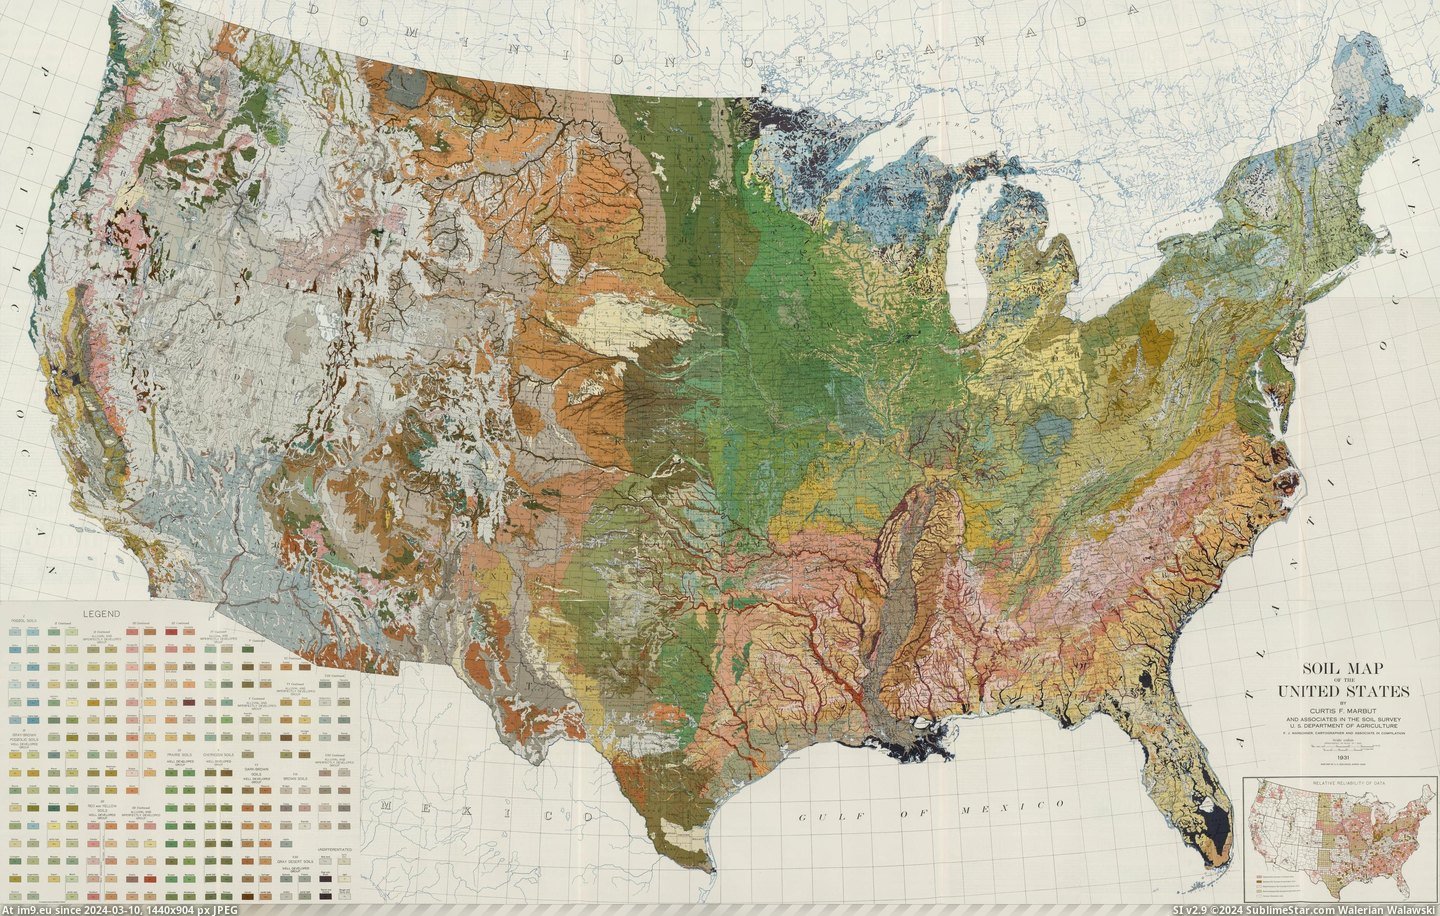 #Map #American #Atlas #Soil #Agriculture #States #United [Mapporn] Soil Map of the United States, from the Atlas of American Agriculture (1931) [3686x2327] Pic. (Bild von album My r/MAPS favs))